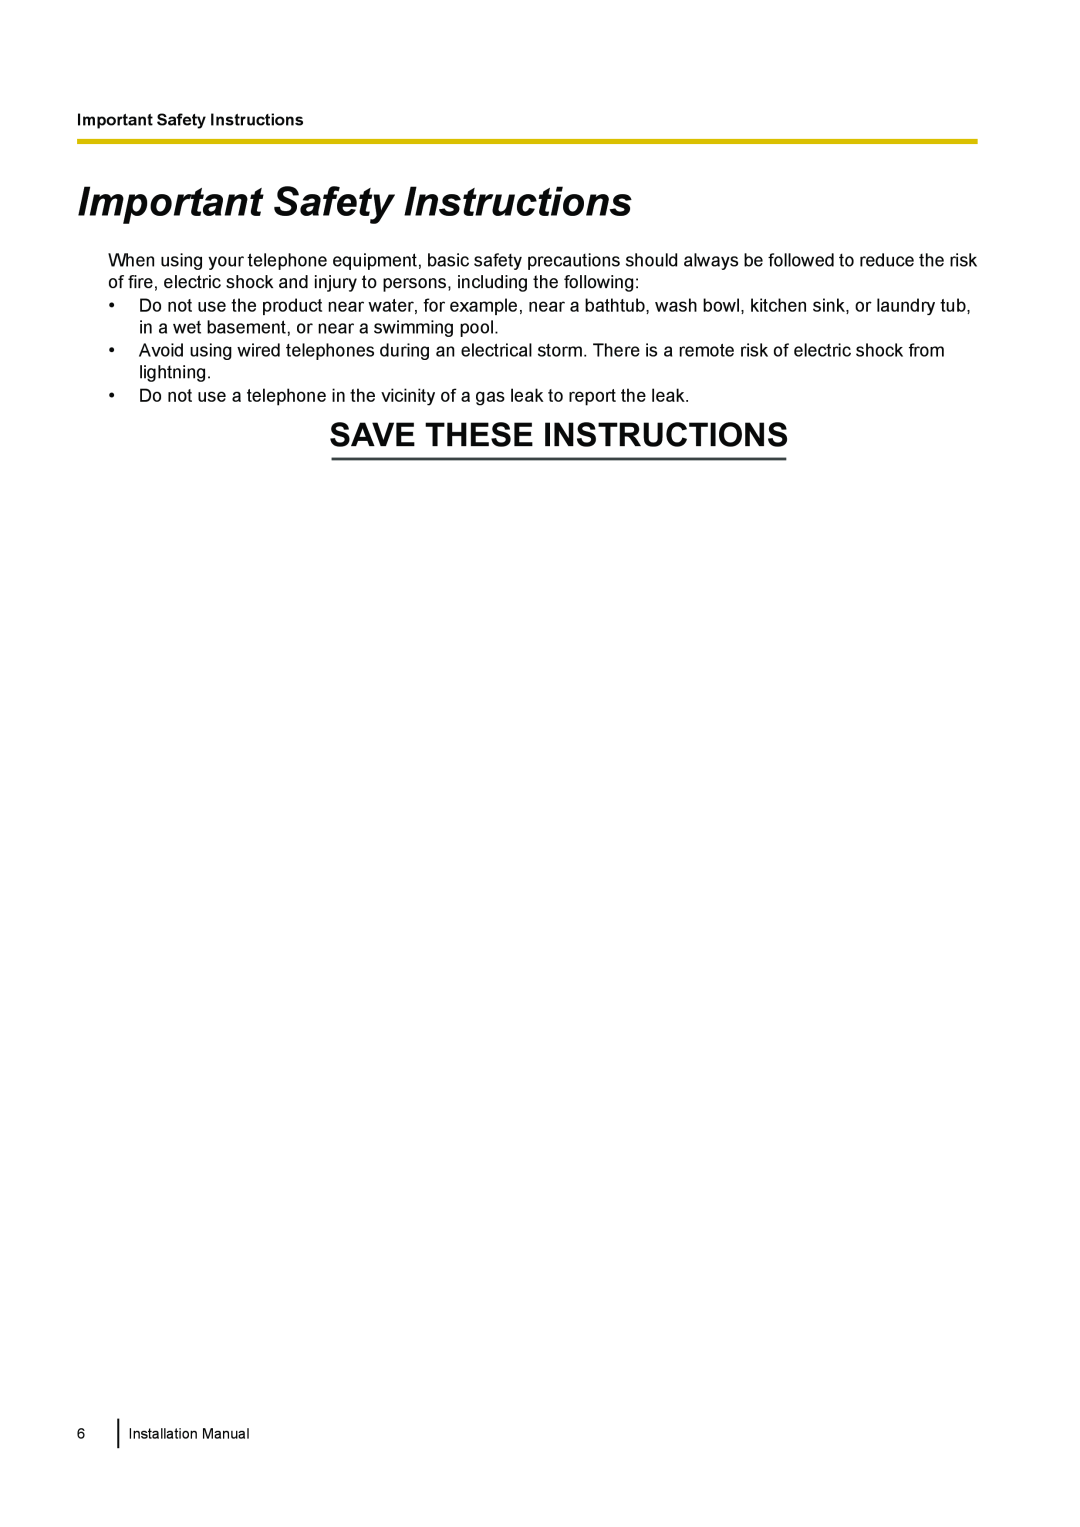 Panasonic KX-TDA100 installation manual Important Safety Instructions, Save These Instructions 